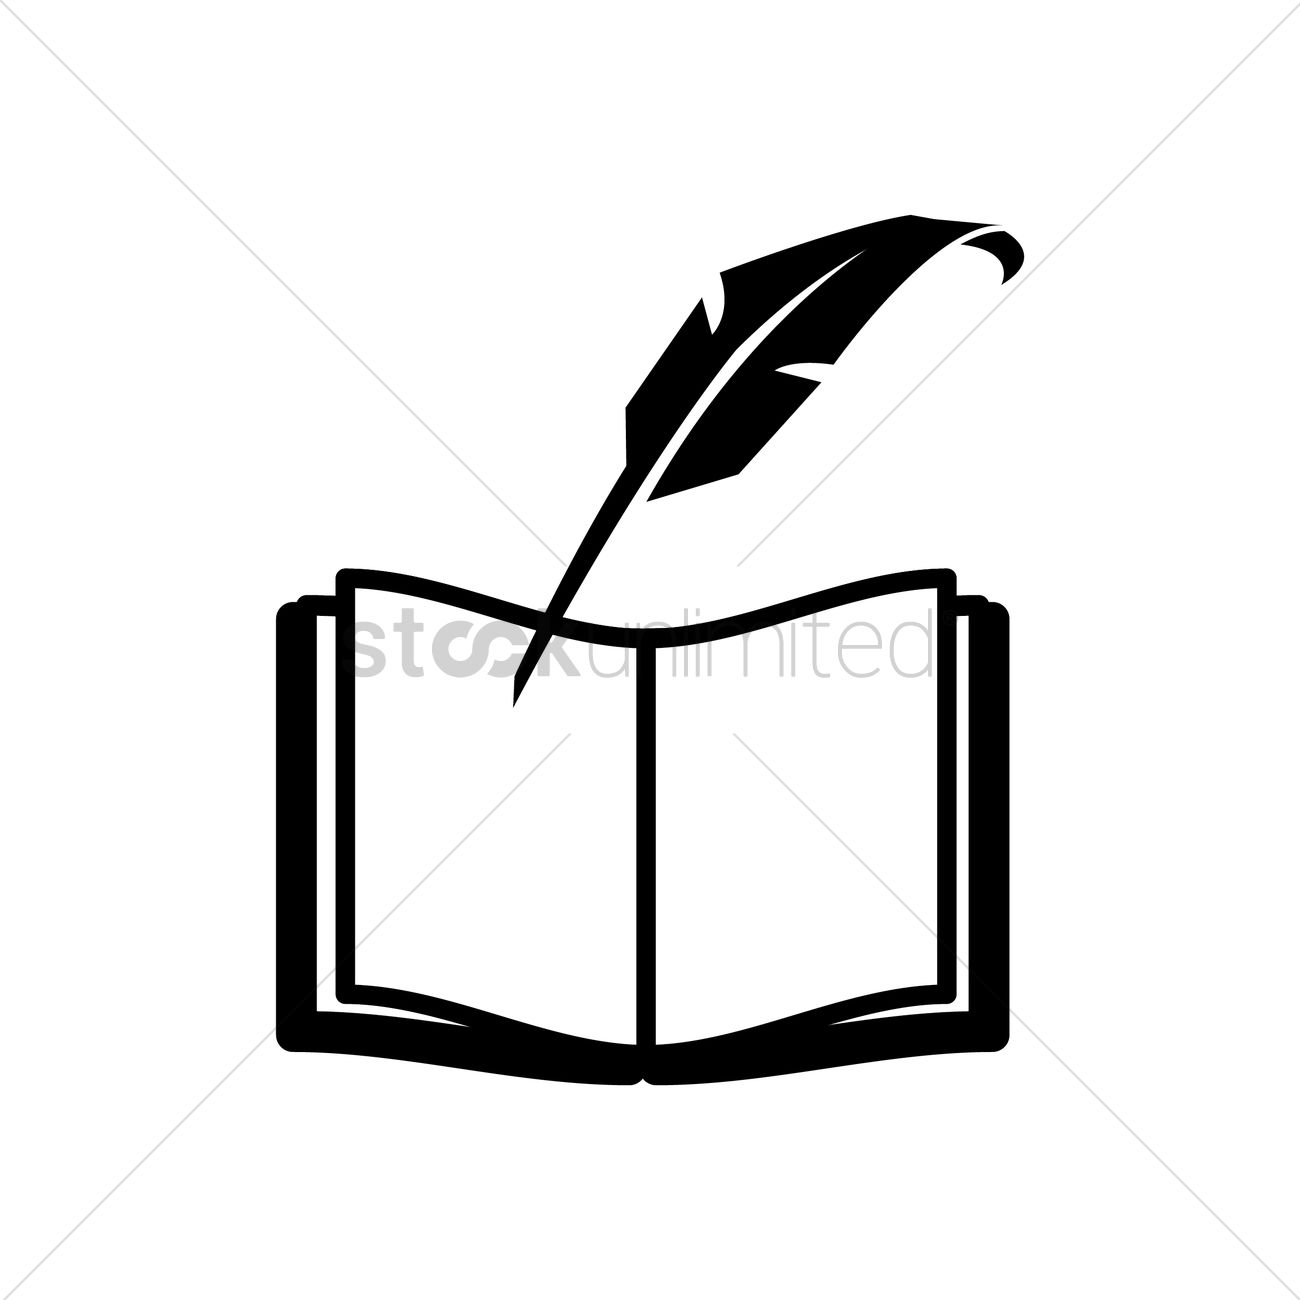 Opened book with quill pen Vector Image